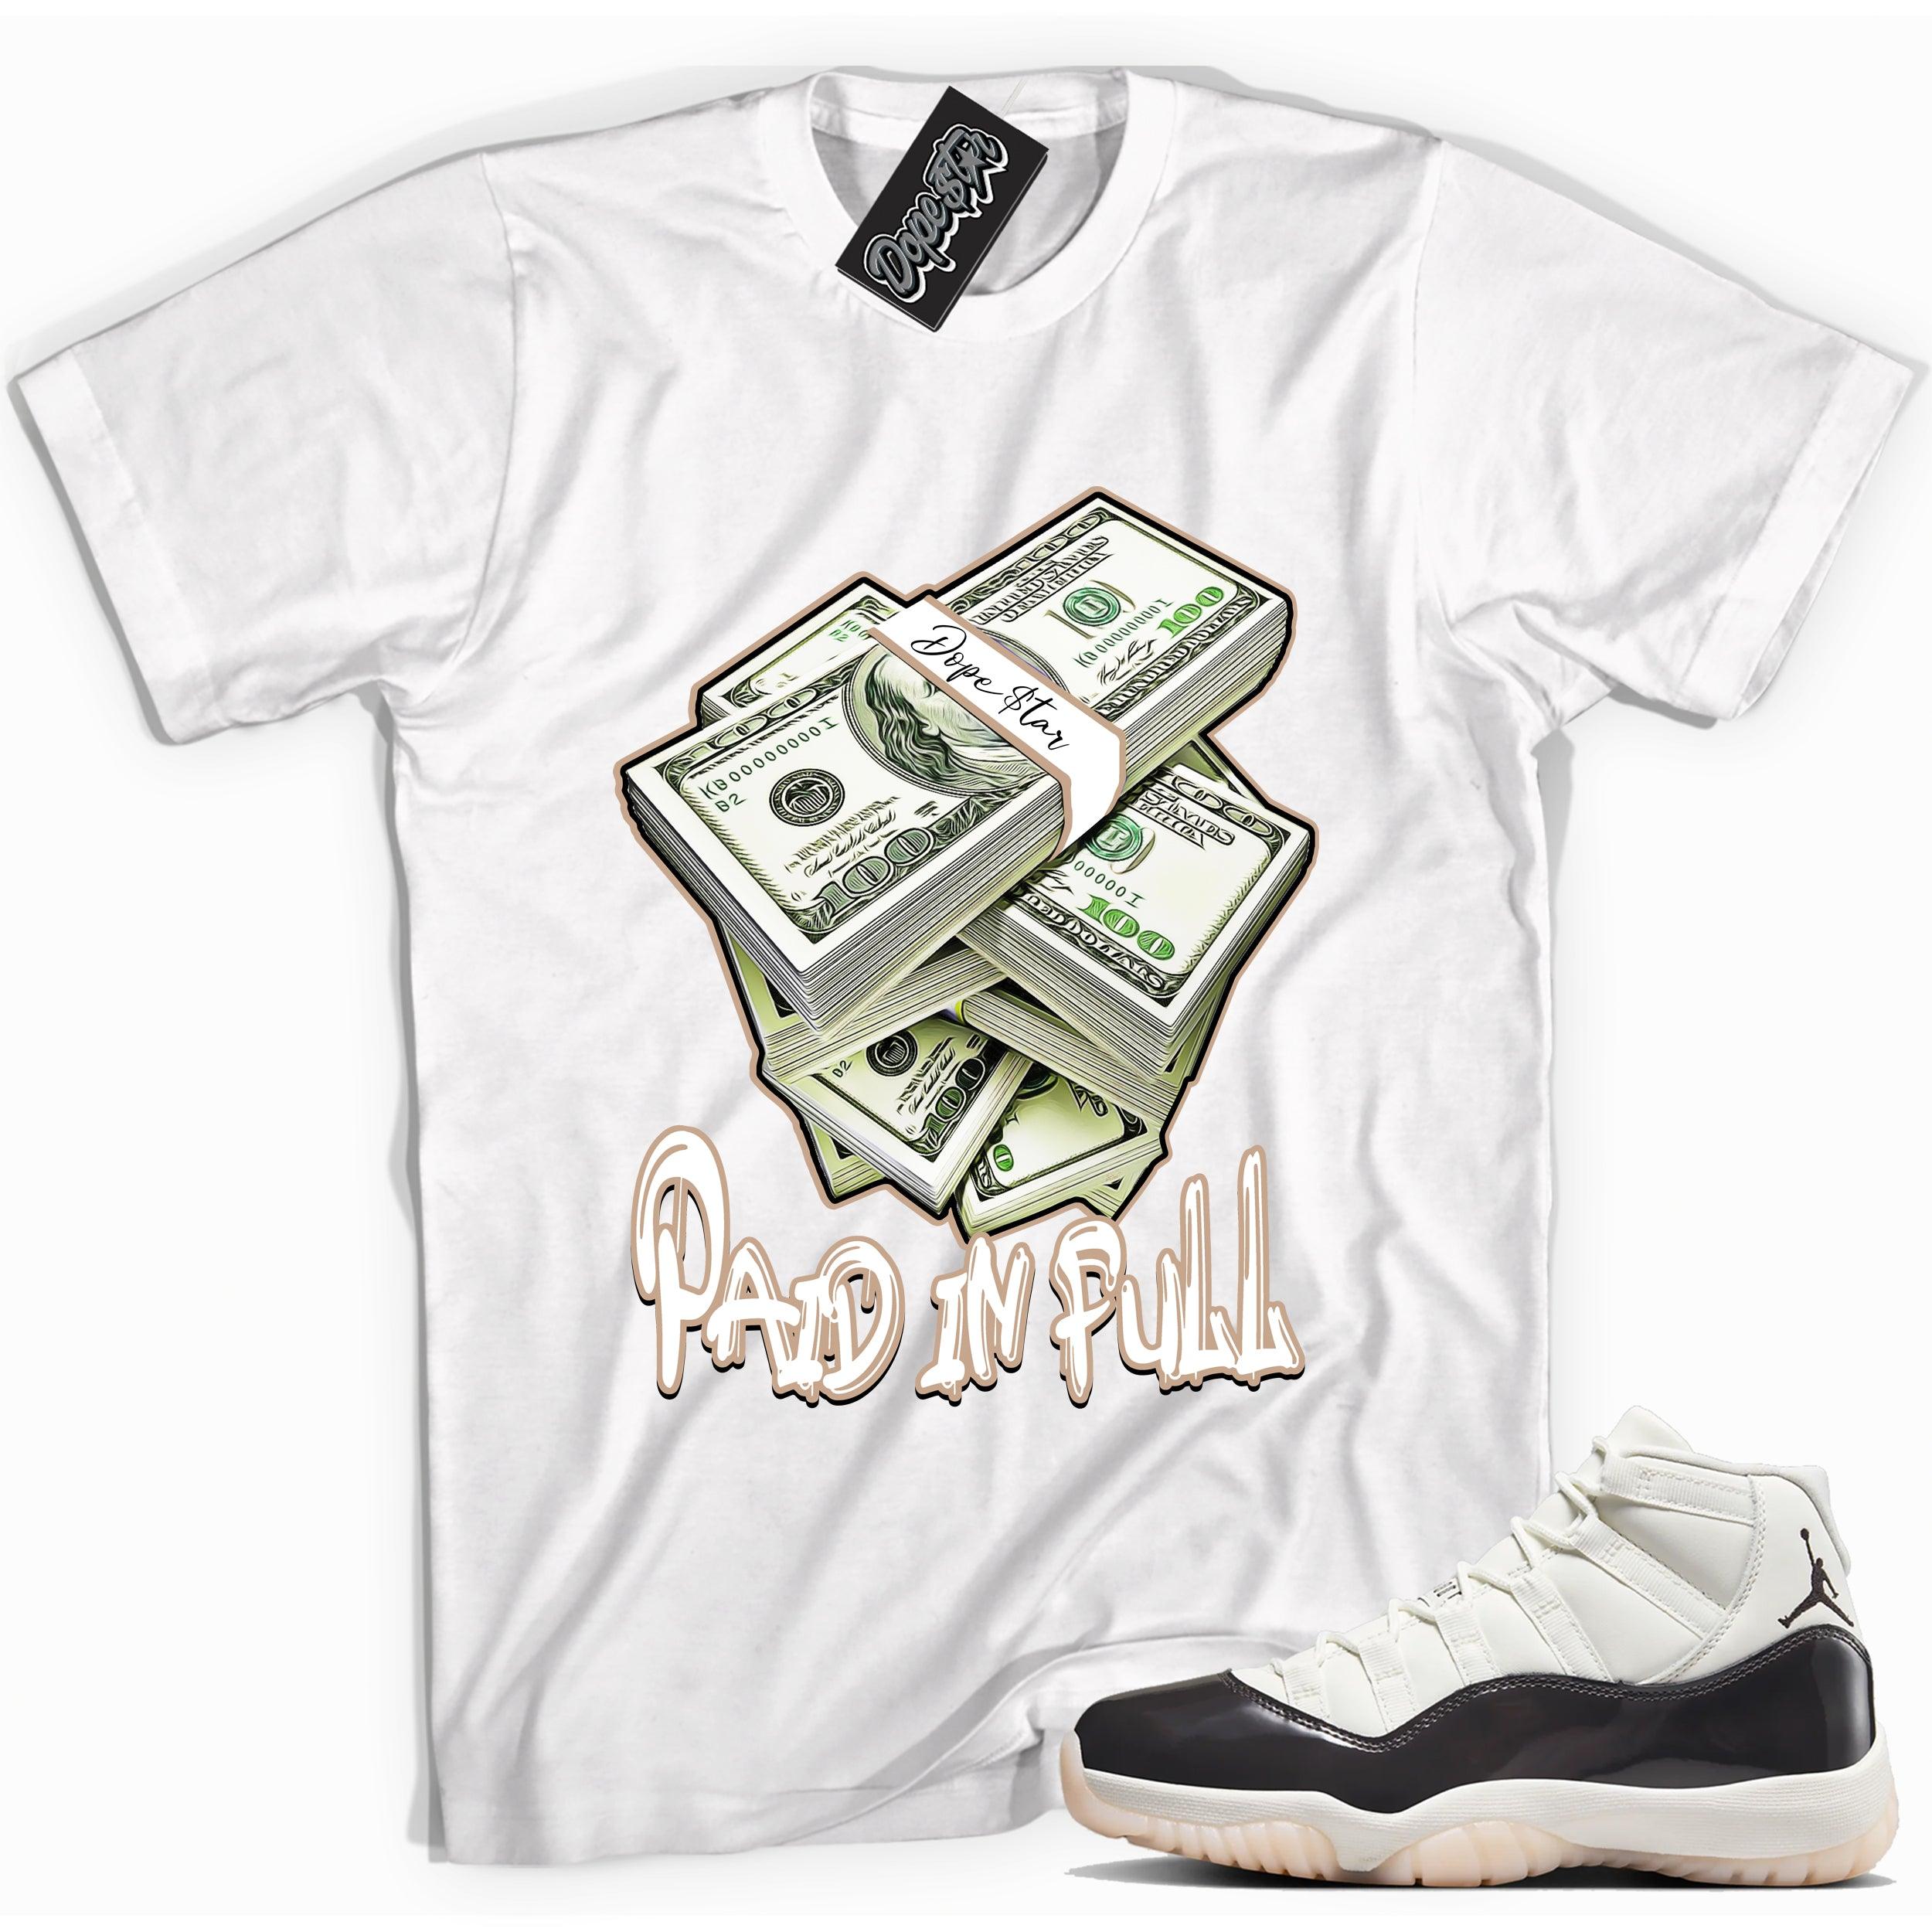 Cool White graphic tee with “ Paid In Full ” print, that perfectly matches Air Jordan 11 Neapolitan sneakers 